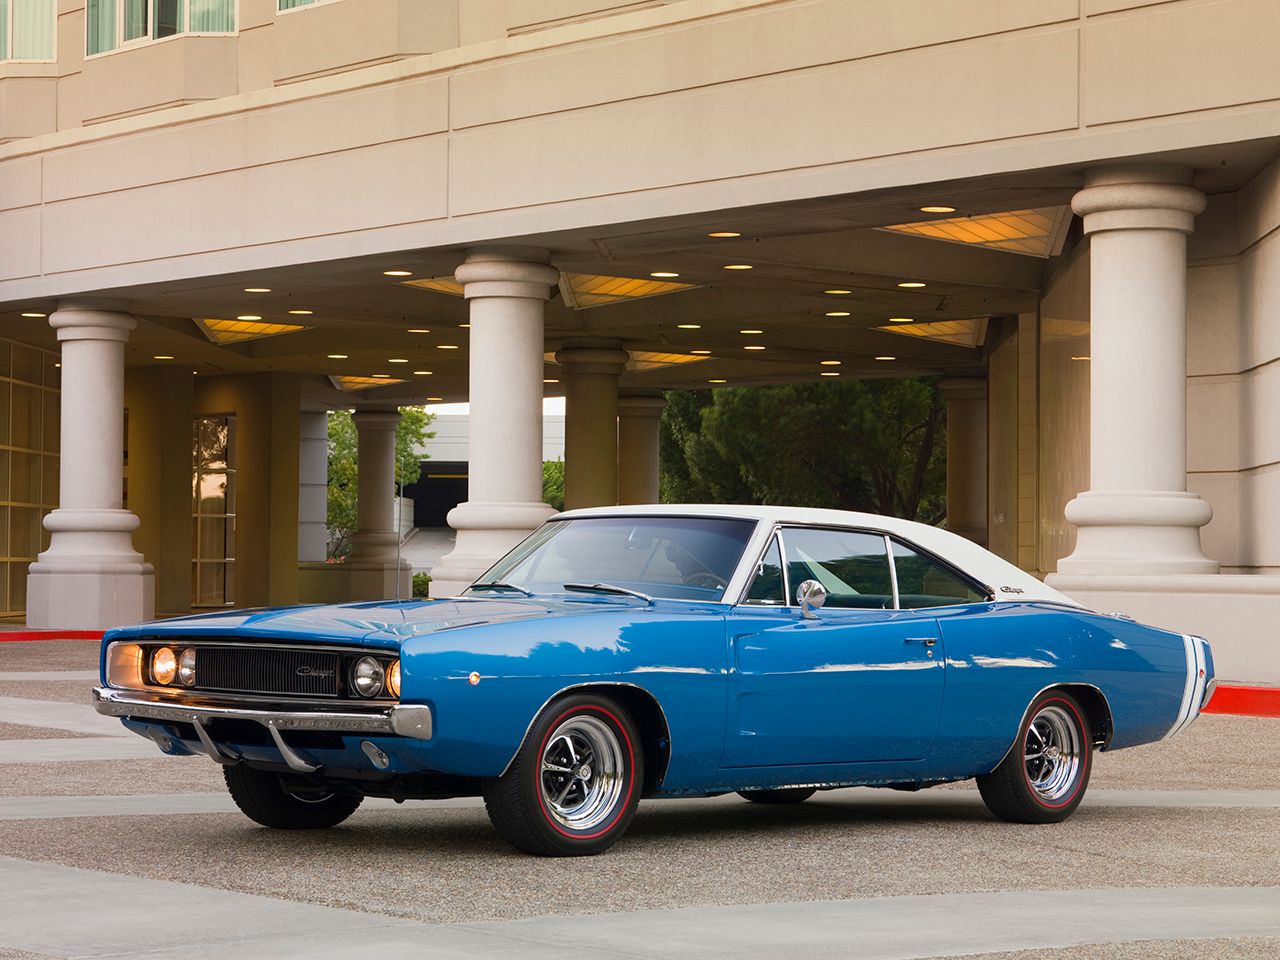 '68 Dodge Charger R/T Scat Pack in blue with vinyl top